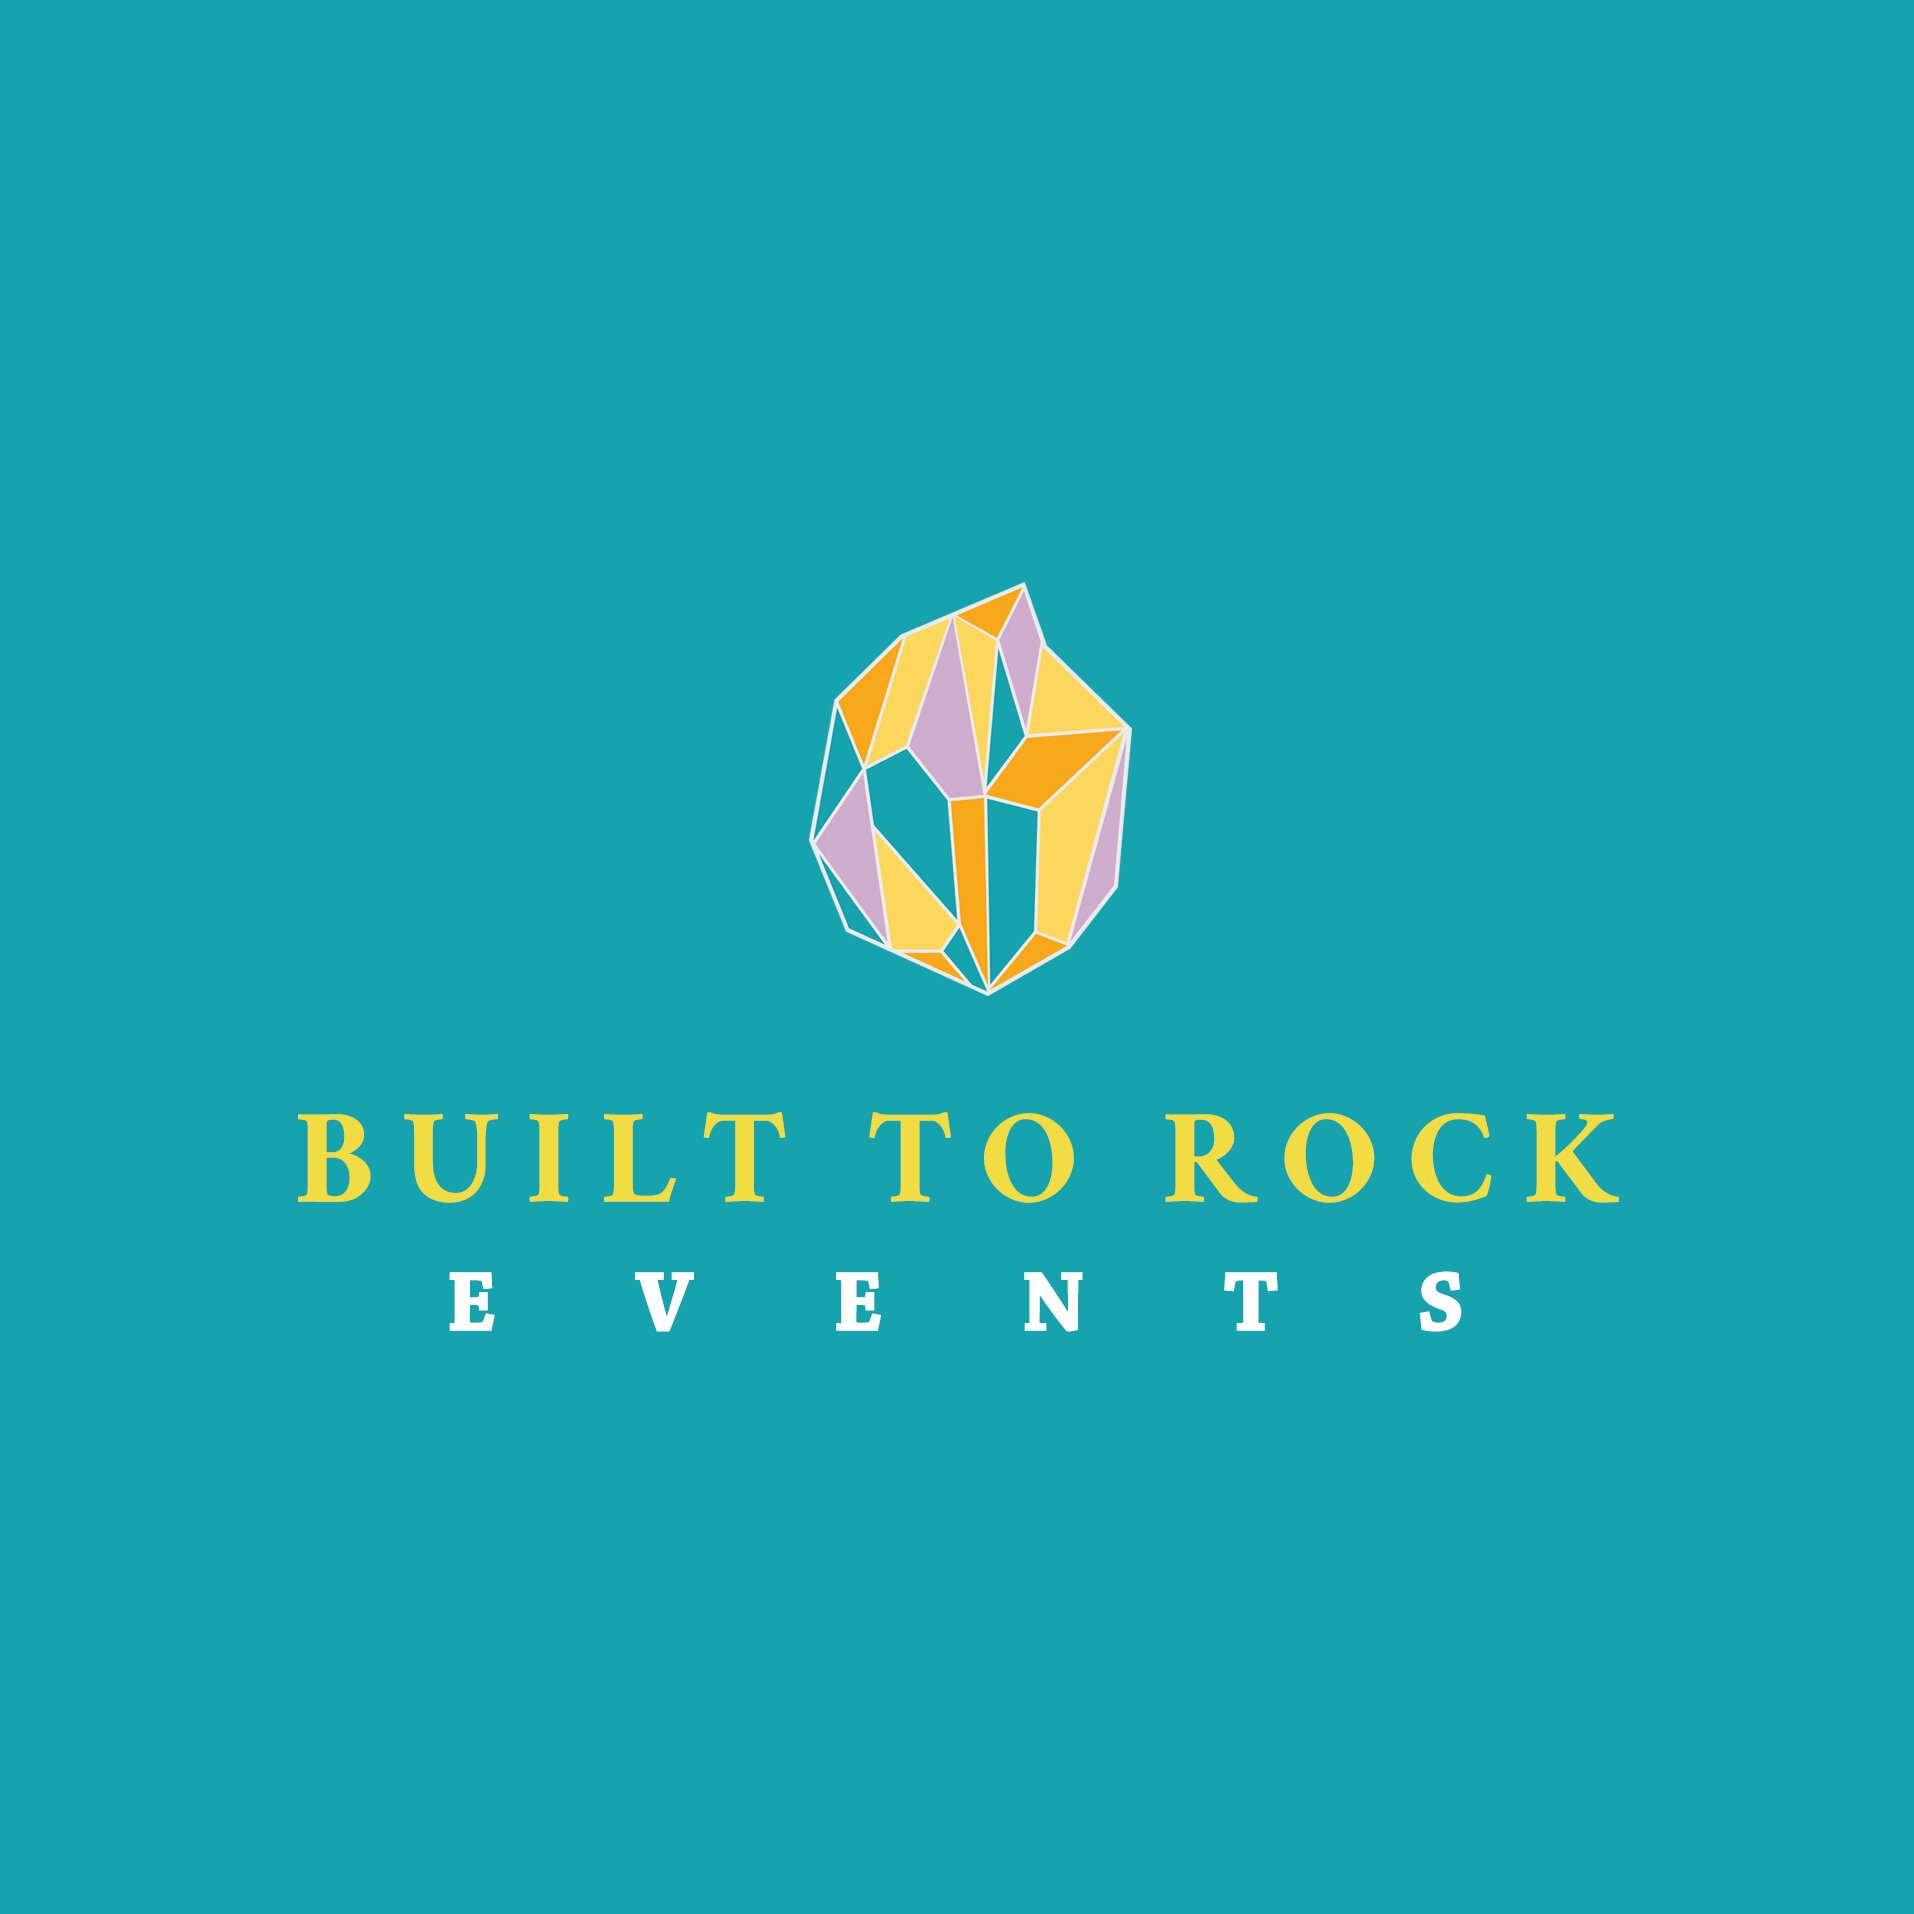 Built to Rock Events